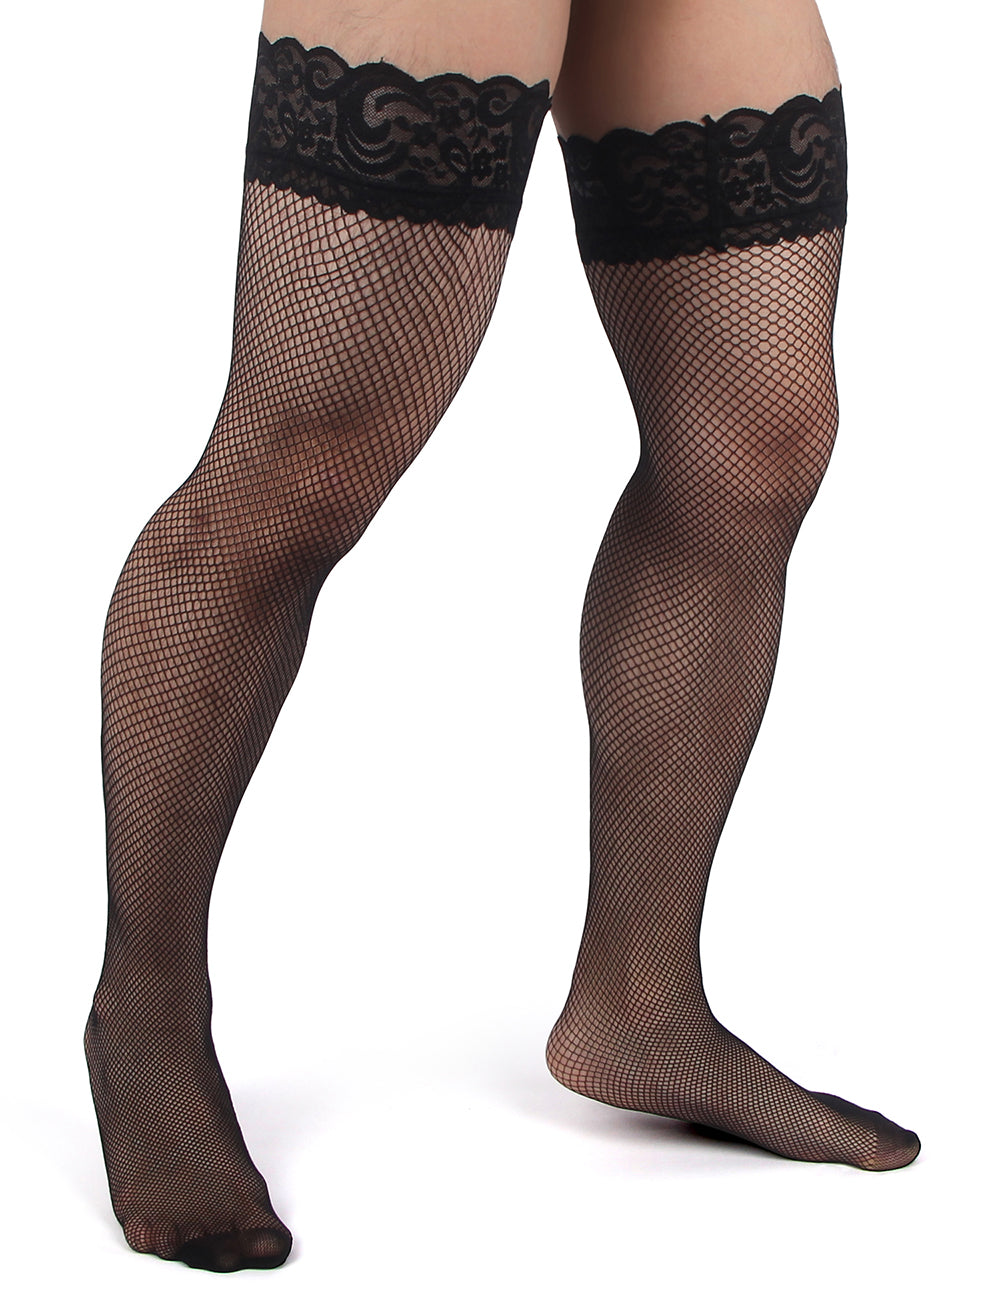 JCSTK - Unisex Fishnet Lace Top Stockings, Strong for Our Males to Wear! Black